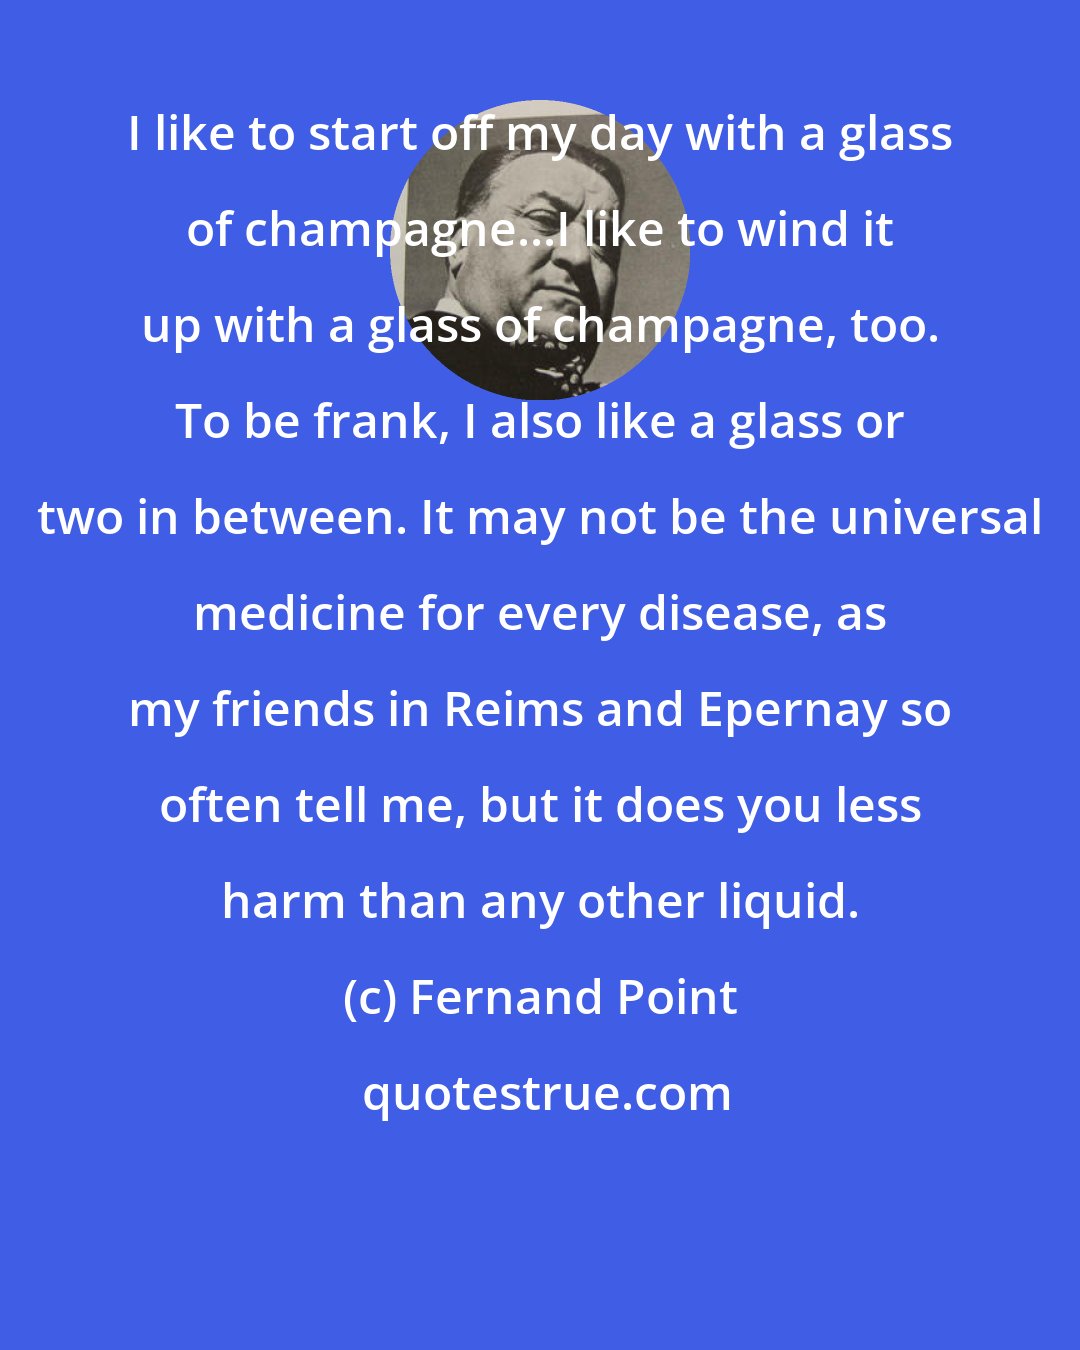 Fernand Point: I like to start off my day with a glass of champagne...I like to wind it up with a glass of champagne, too. To be frank, I also like a glass or two in between. It may not be the universal medicine for every disease, as my friends in Reims and Epernay so often tell me, but it does you less harm than any other liquid.